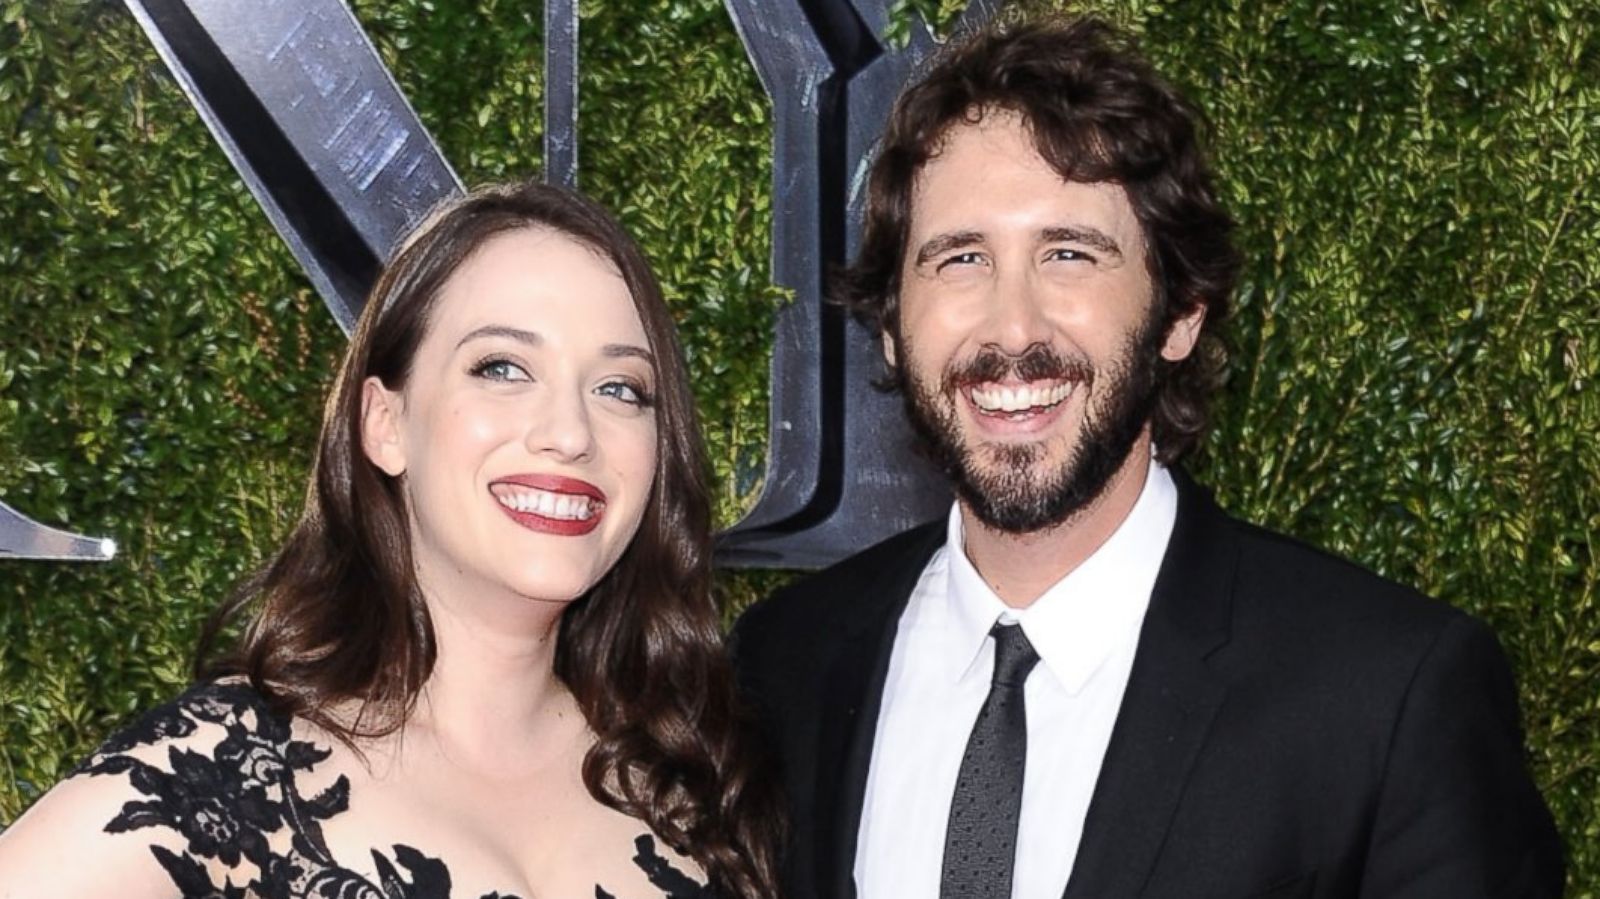 Who Is Josh Groban's Wife, And What's His Dating History?